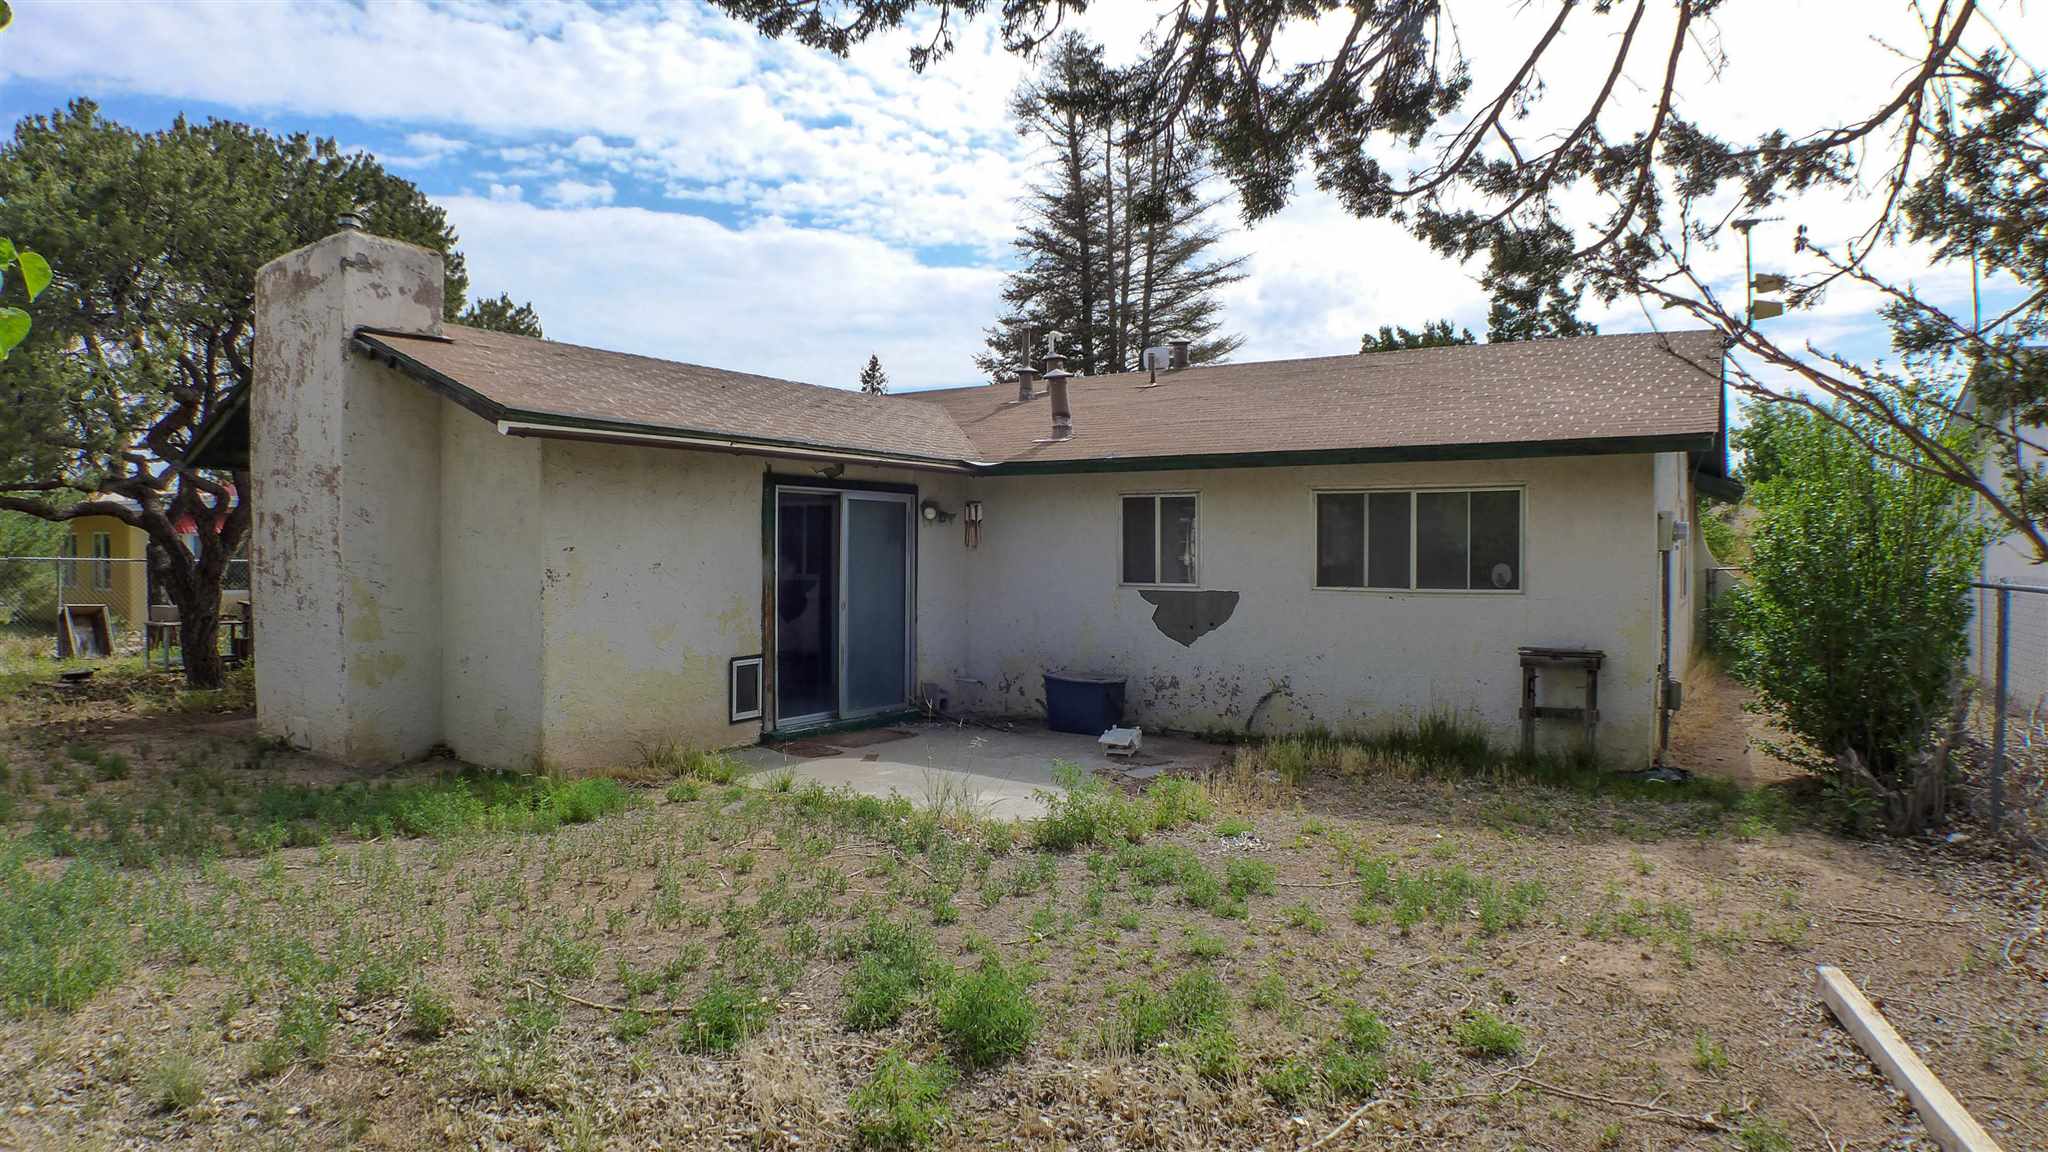 511 Paige, Los Alamos, New Mexico 87544, 3 Bedrooms Bedrooms, ,1 BathroomBathrooms,Residential,For Sale,511 Paige,202103157